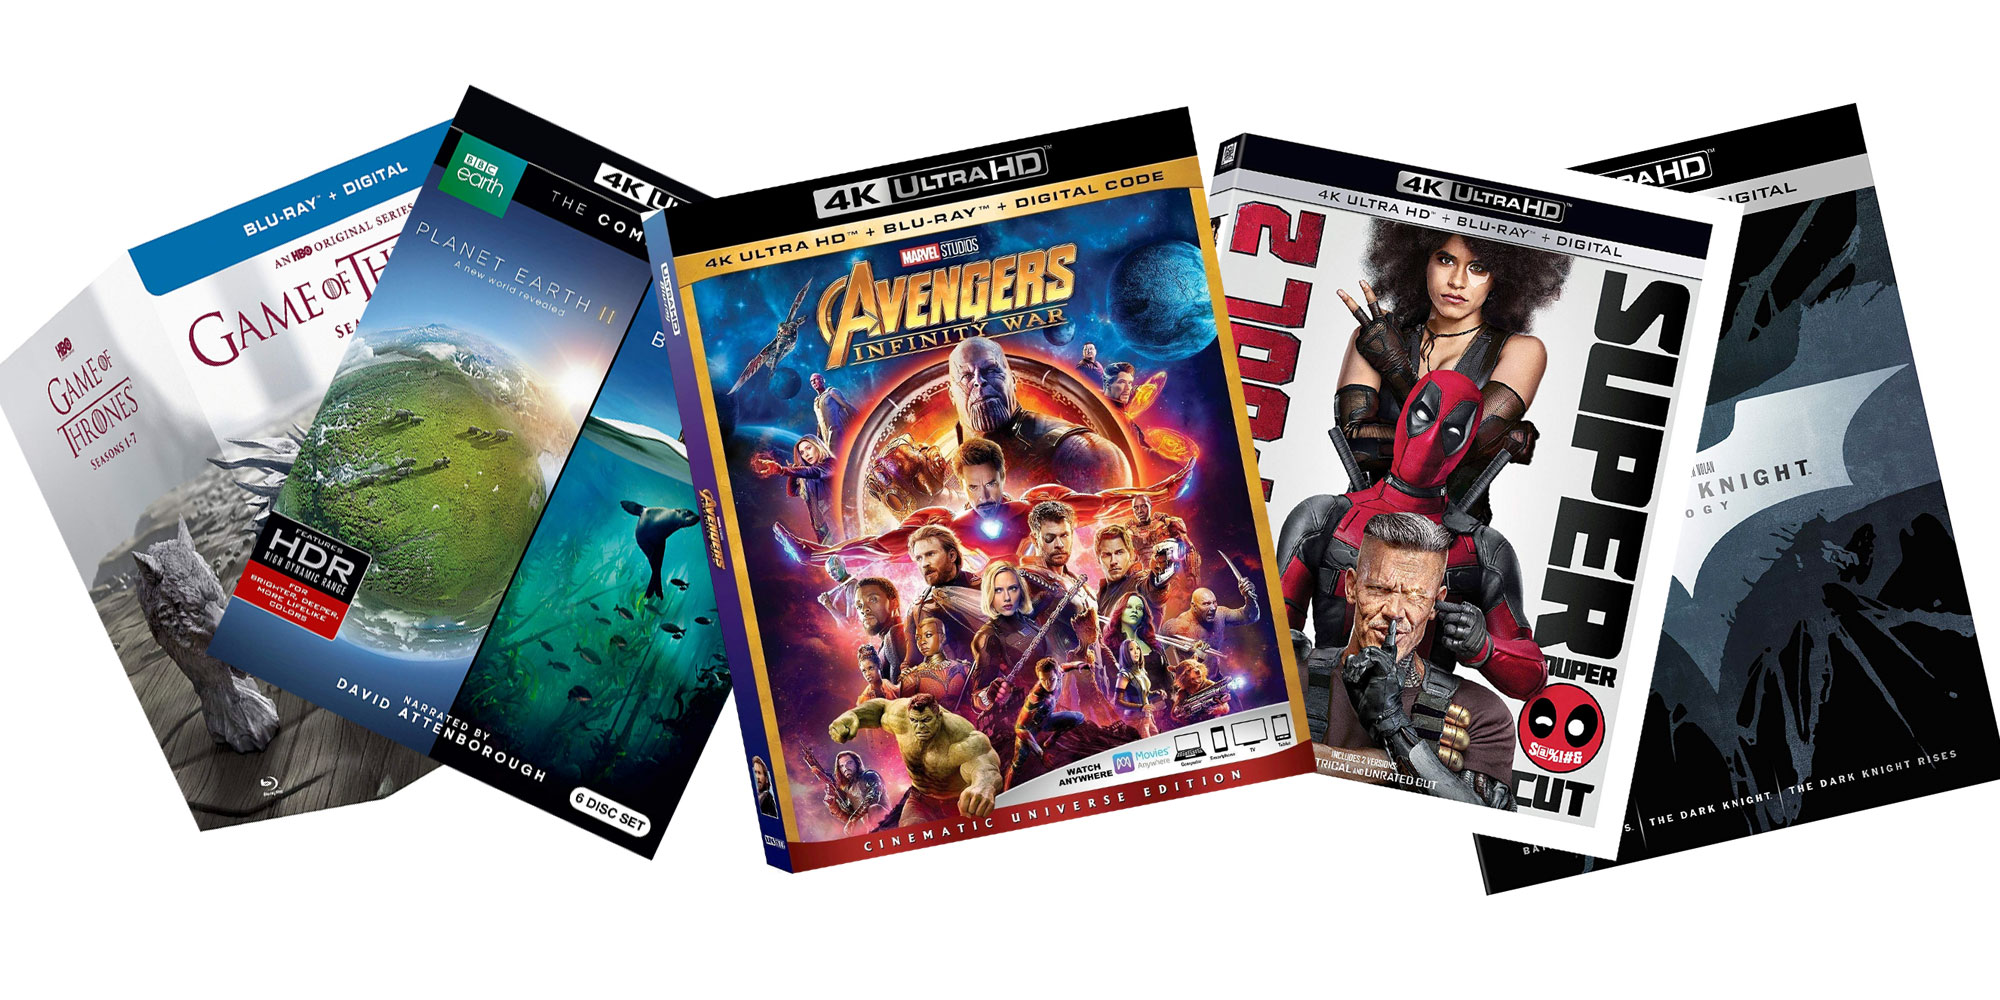 Black Friday Blu-ray Deals from $4: Avengers Infinity War, Game of Thrones  Series, more